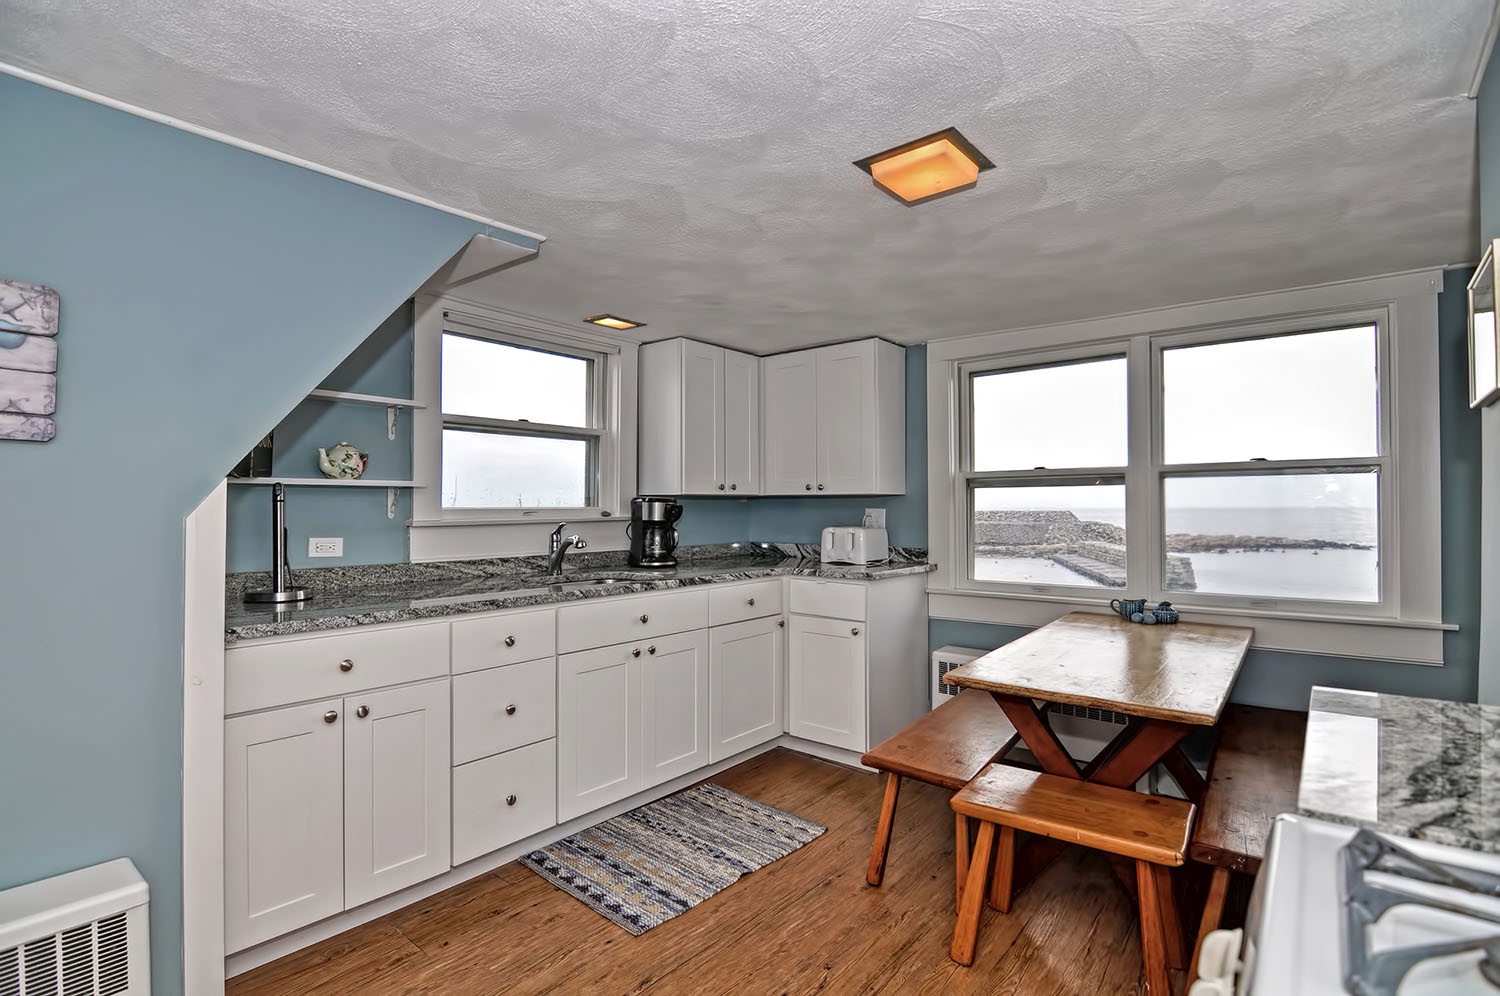 The kitchen has granite countertops and an ocean view.